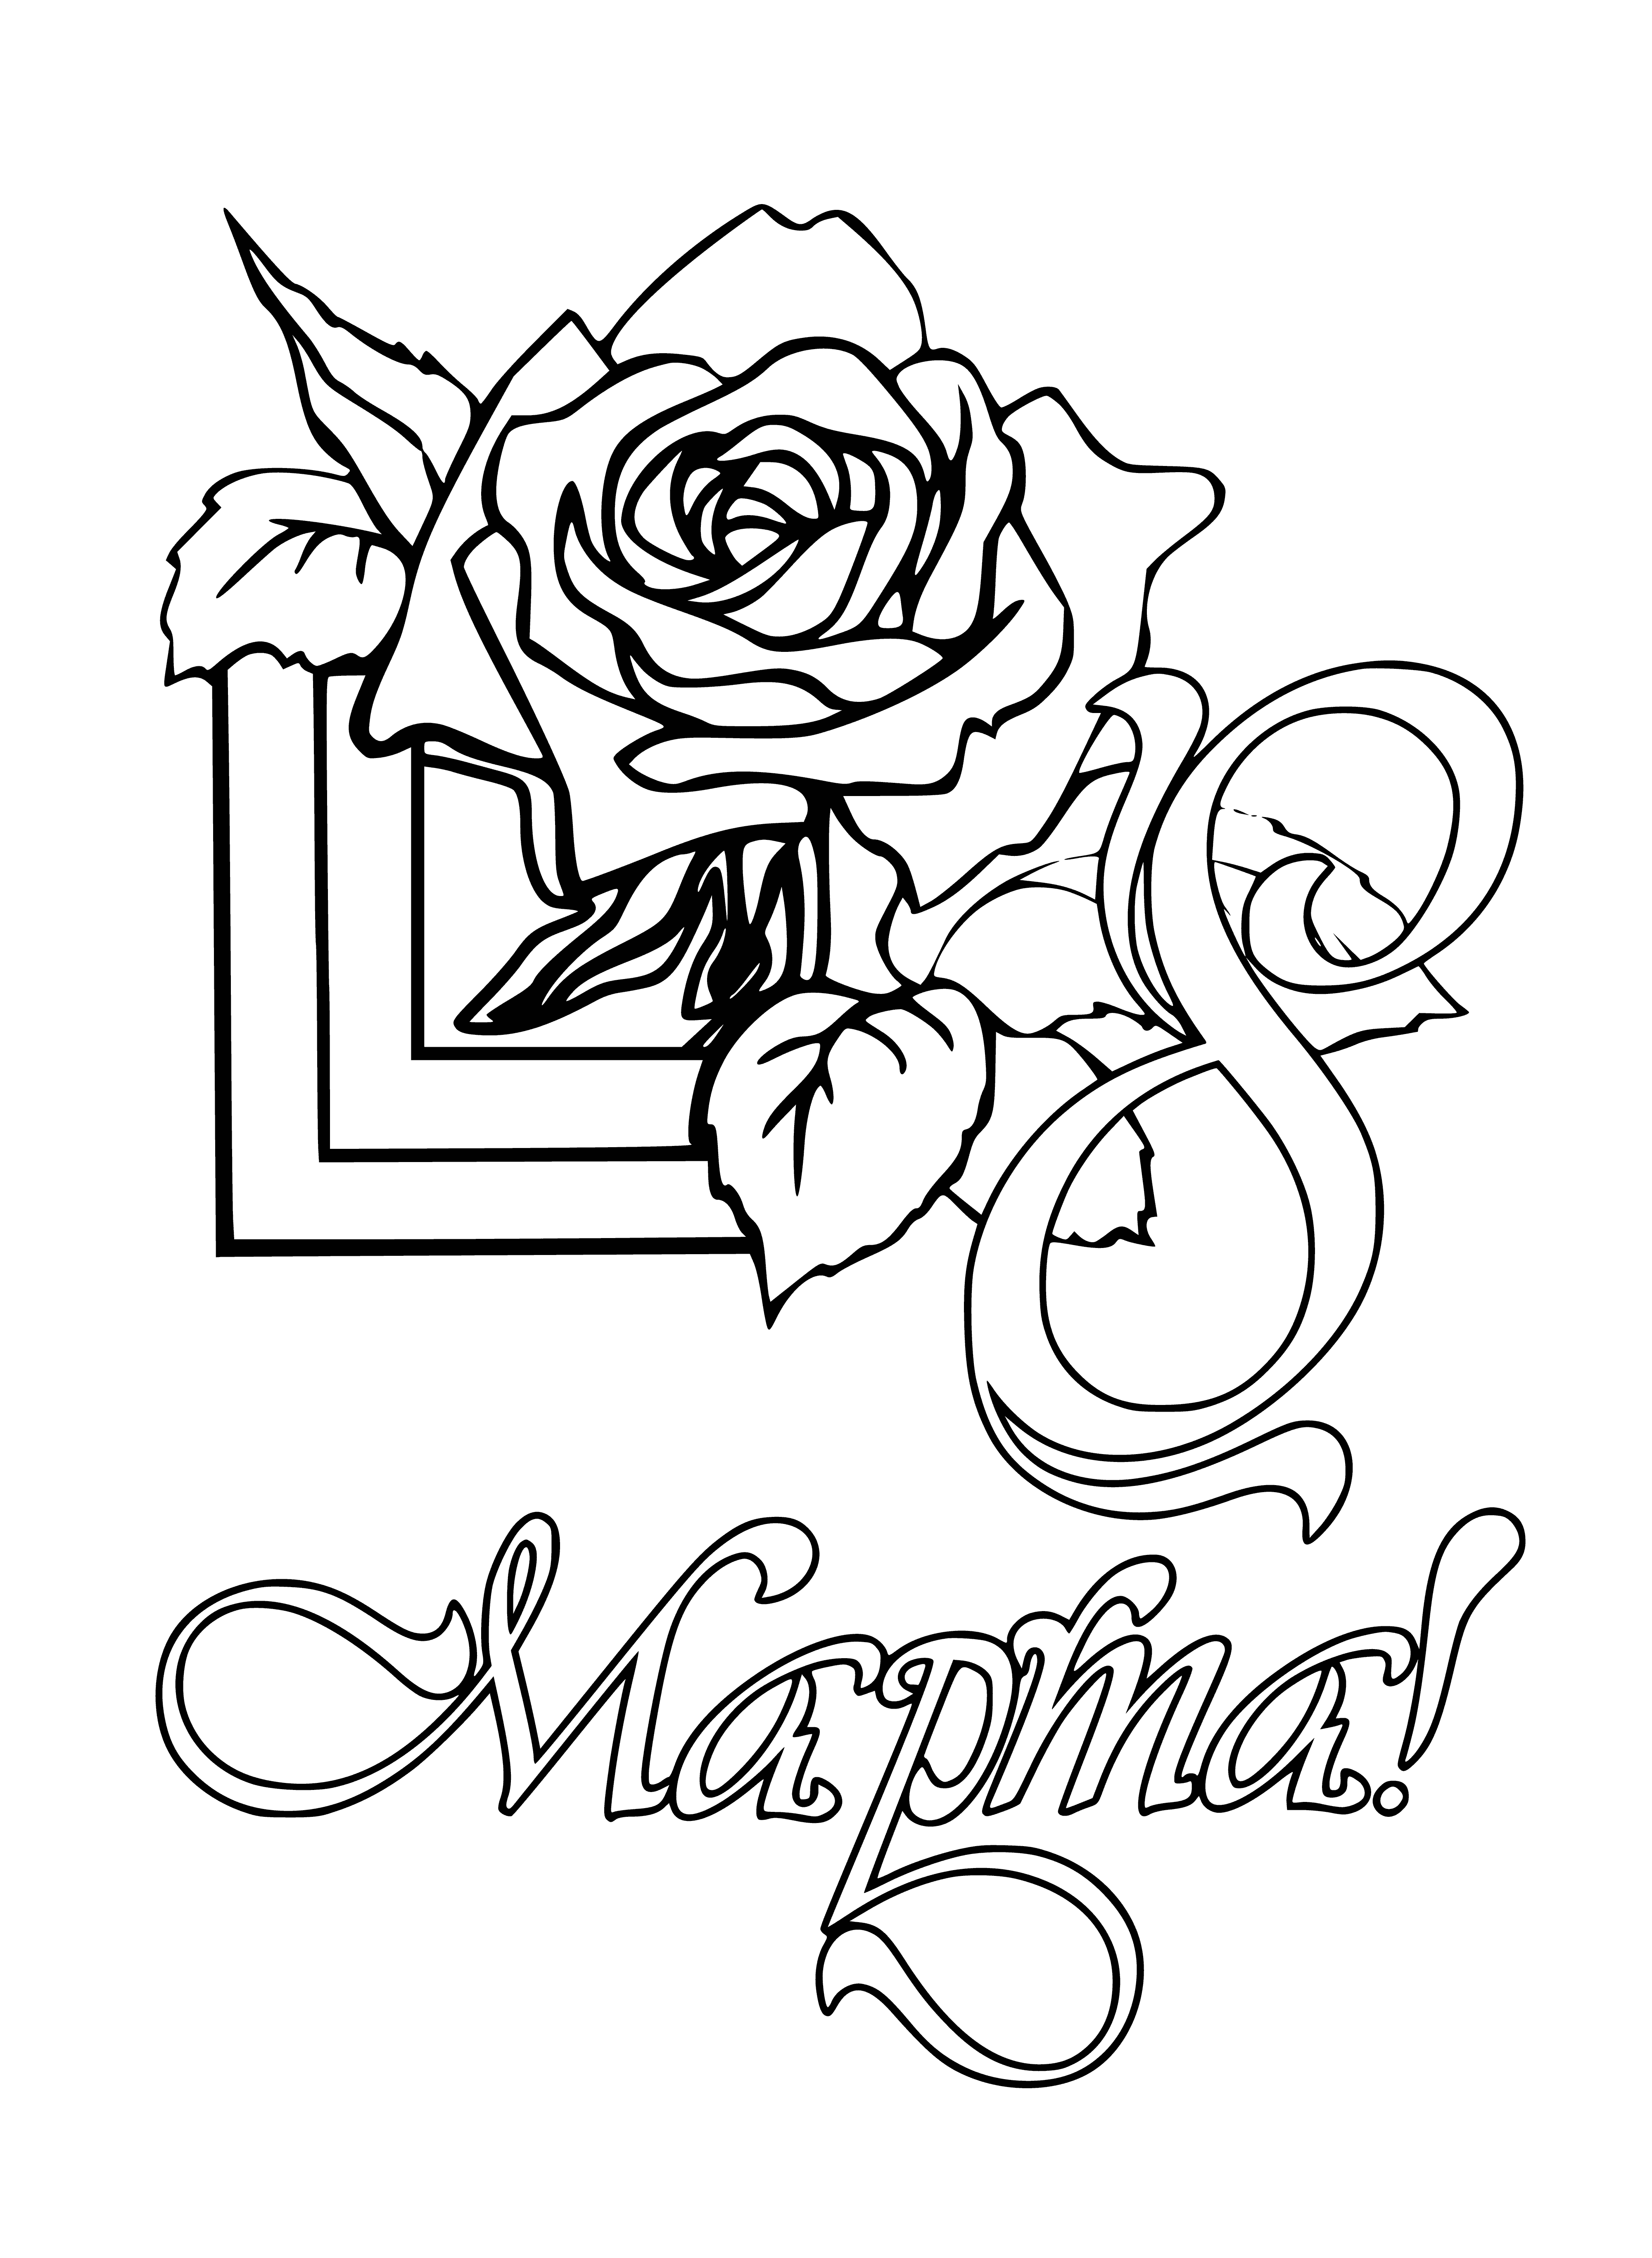 Rose on March 8 coloring page